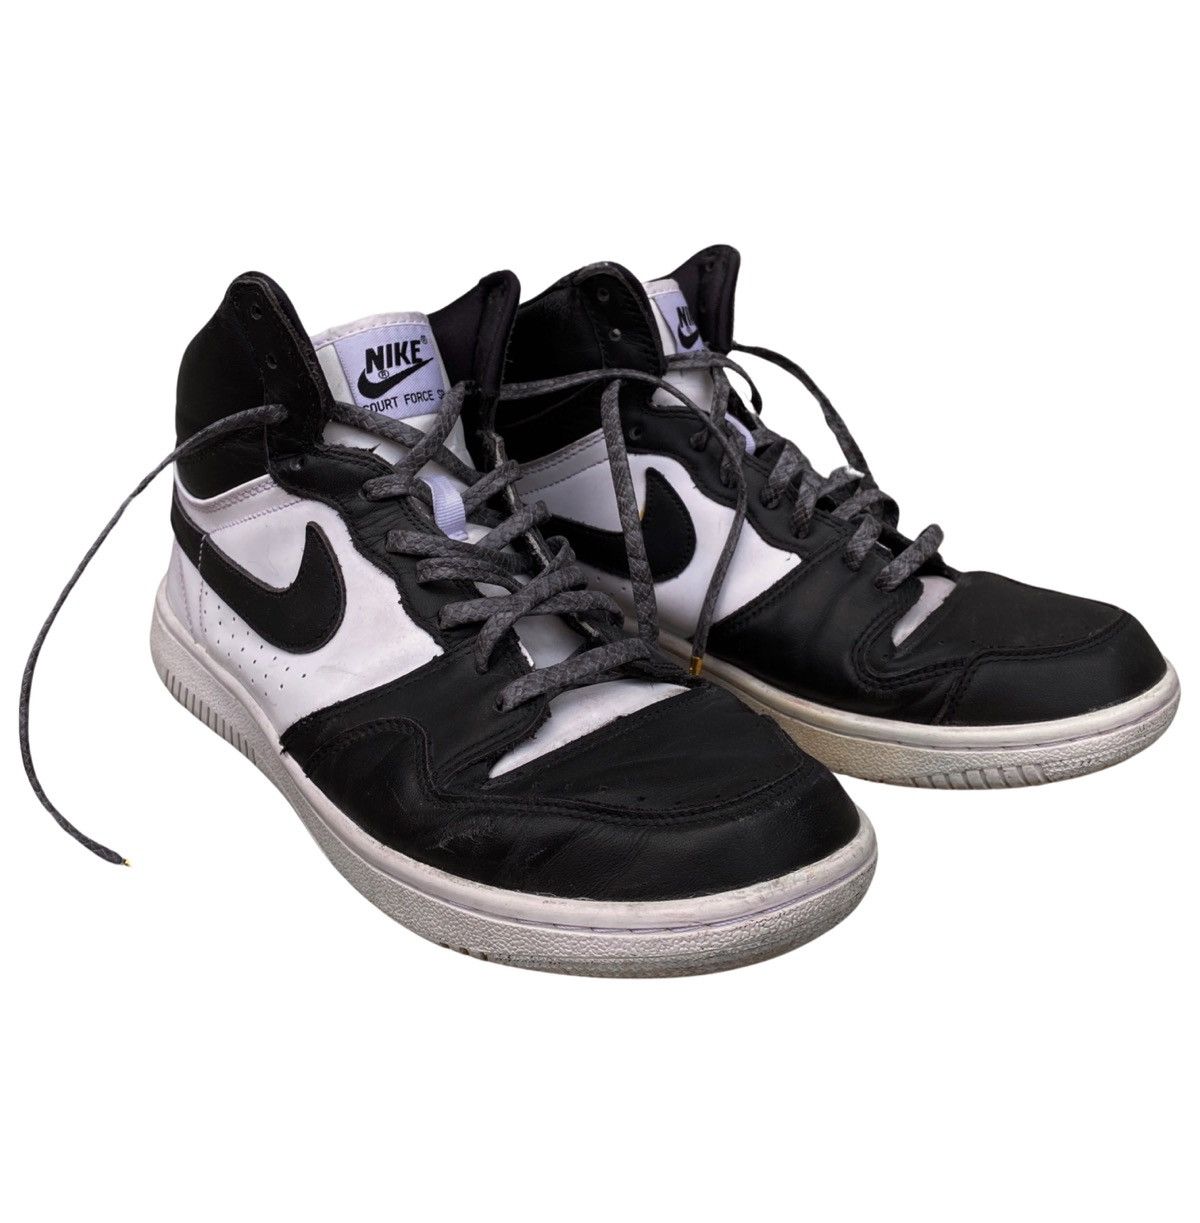 UNDERCOVER X NIKE 2015 HIGH DUNK COURT FORCE - 4